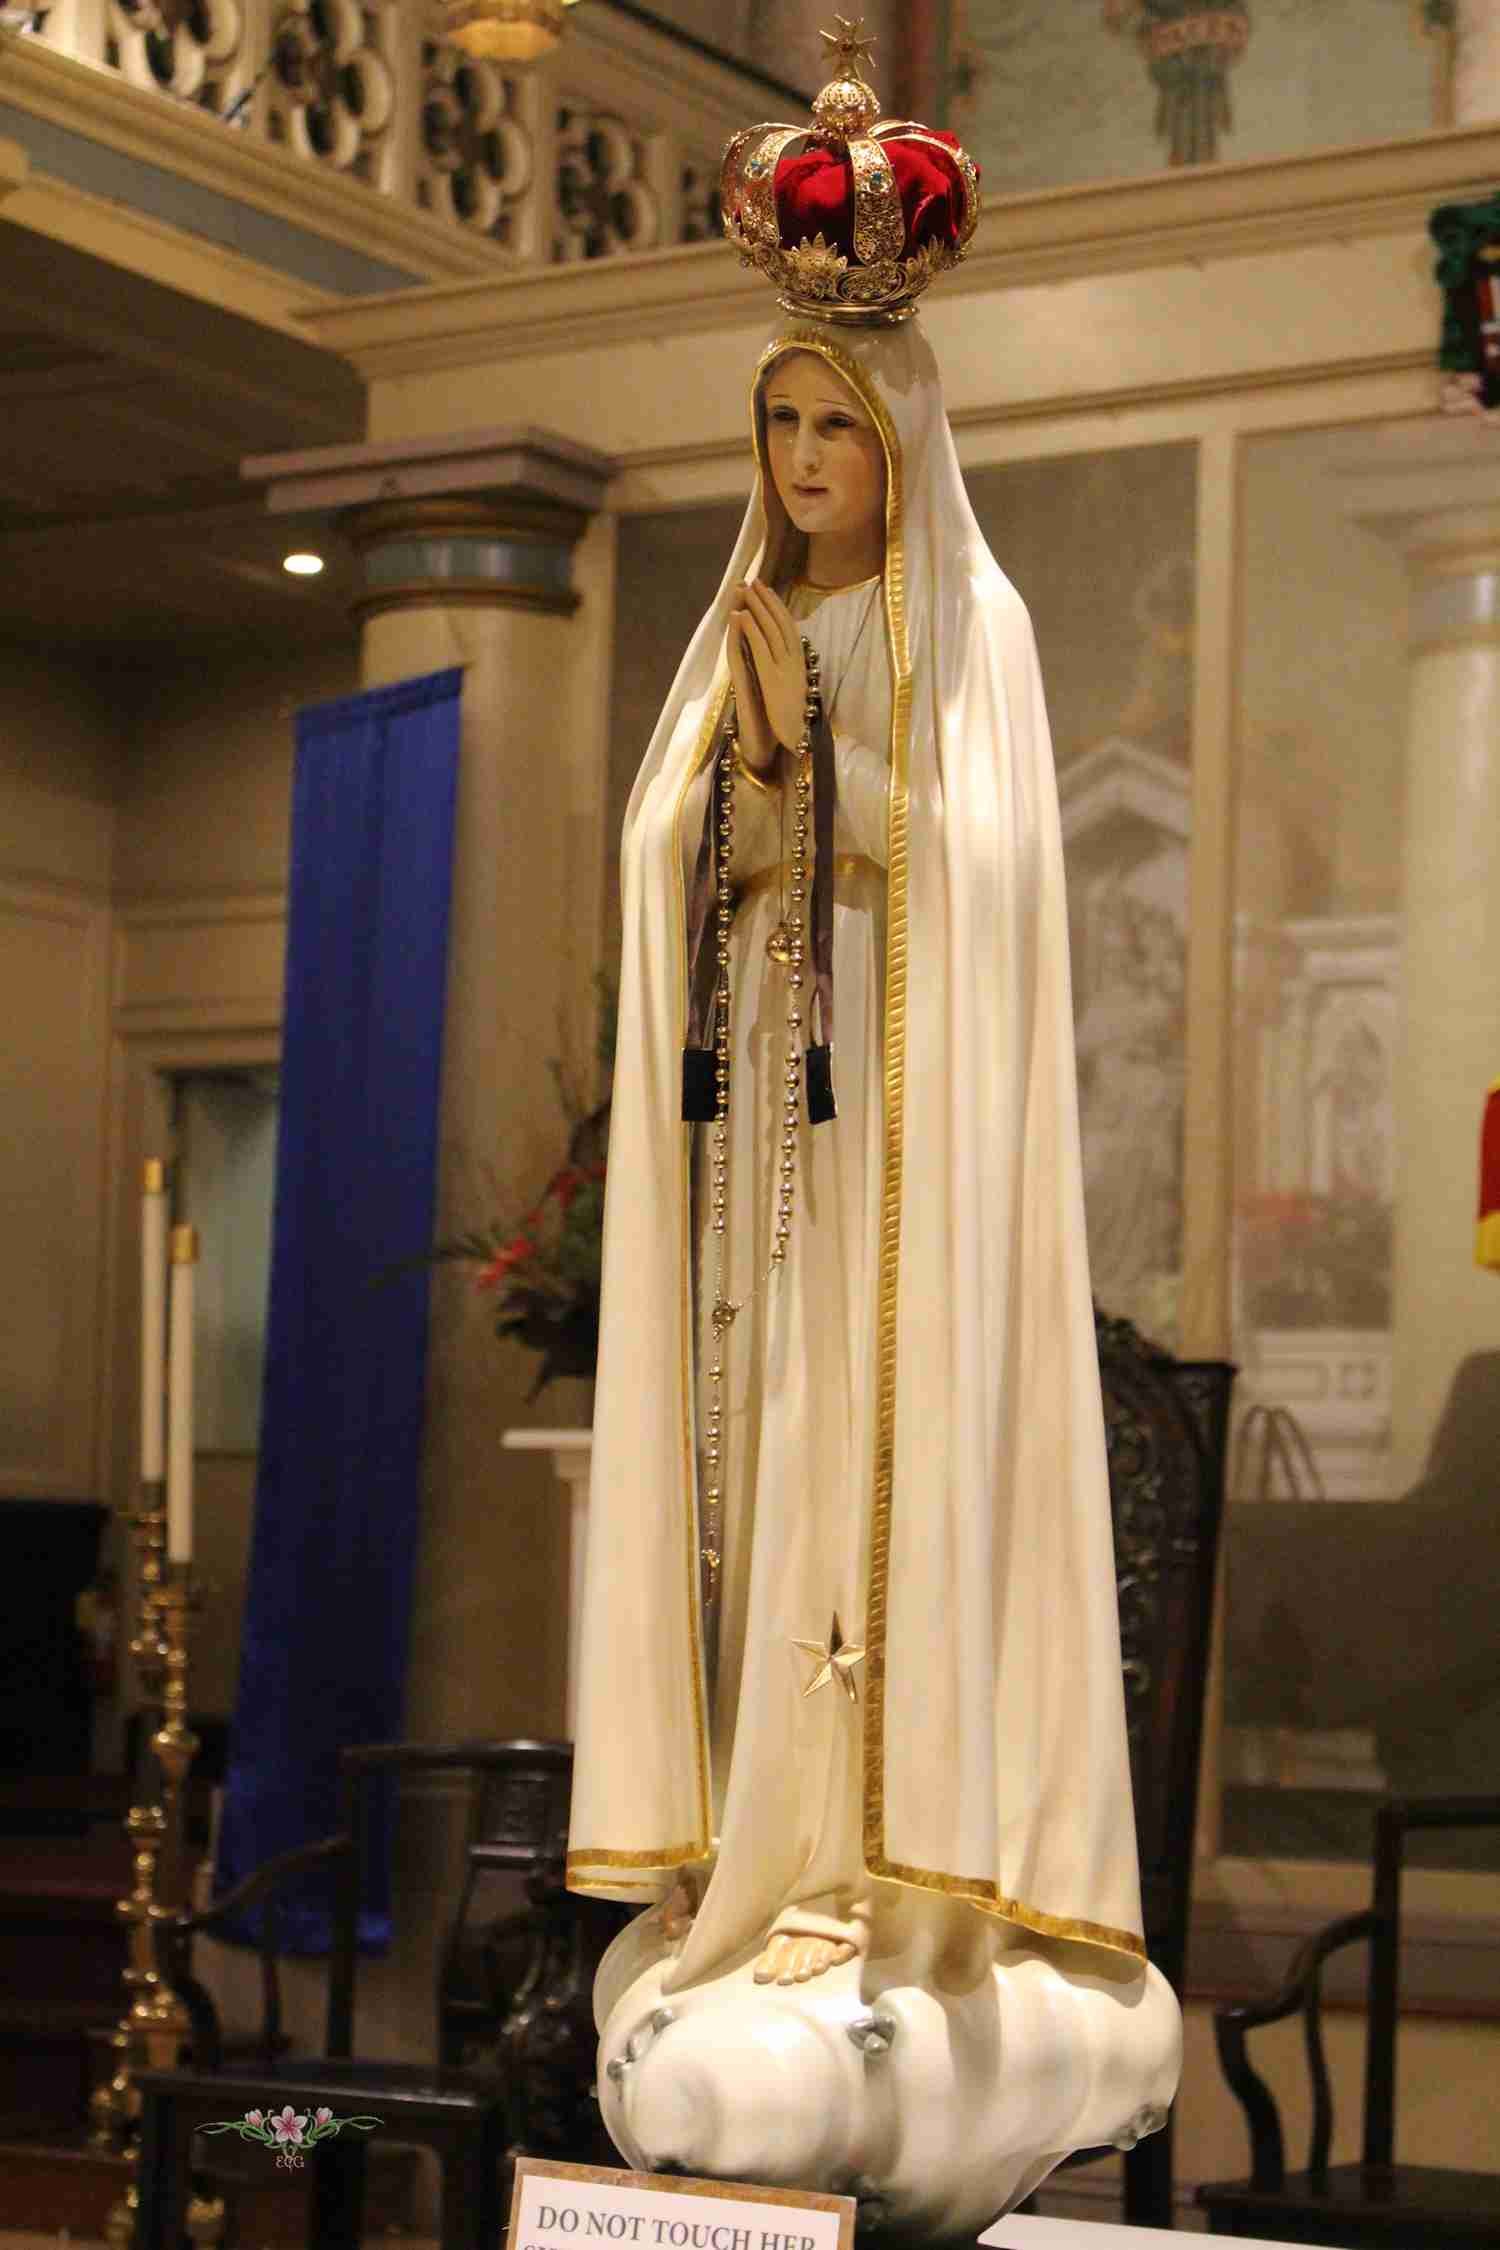 Answering Our Lady of Fatima's call to save souls through devotion to her Immaculate Heart.  Jesus I trust in You!